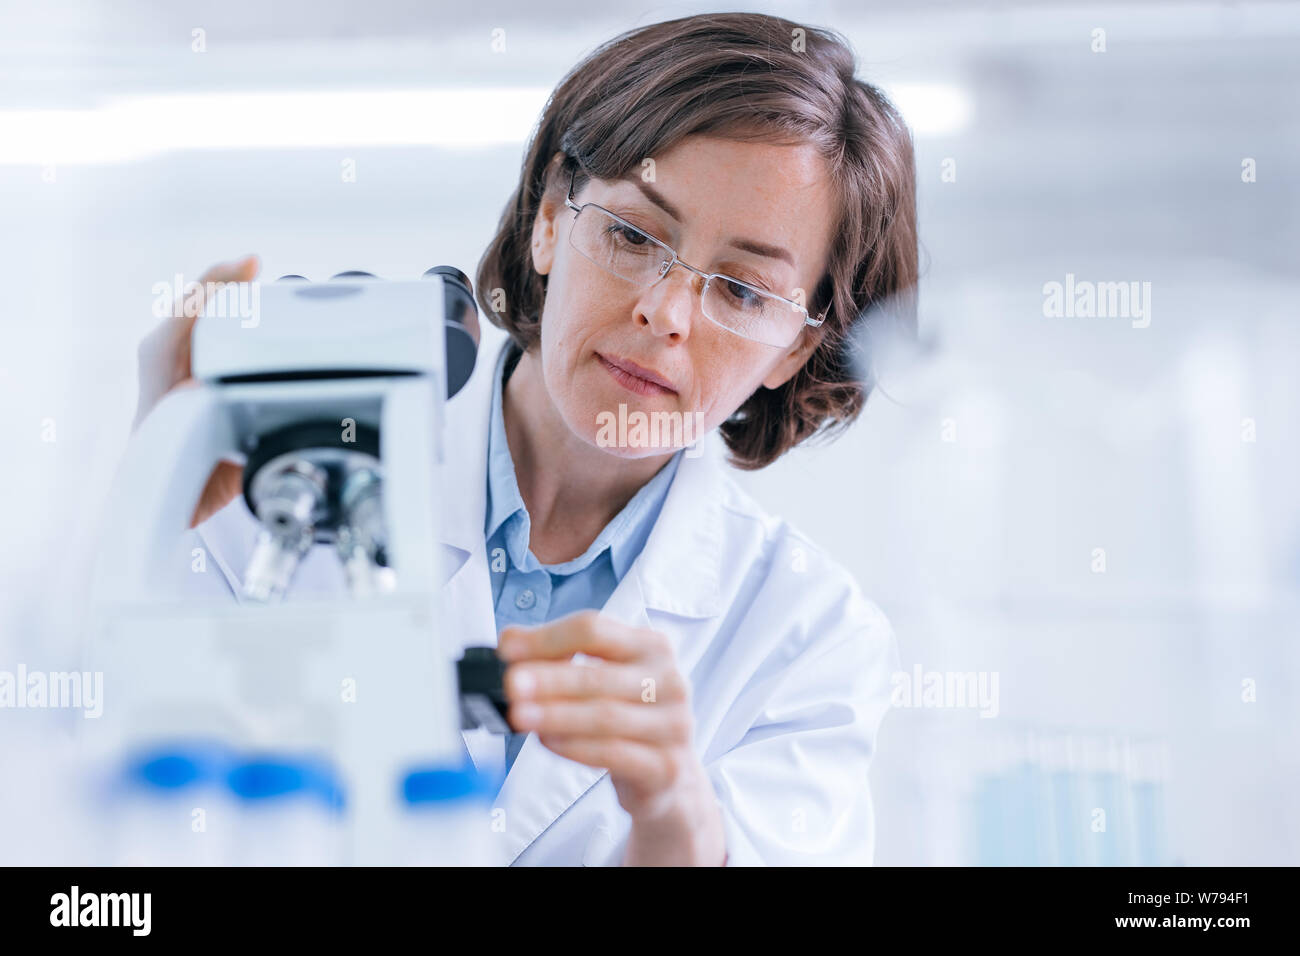 Woman does scientific research with the microscope in the lab. Stock Photo